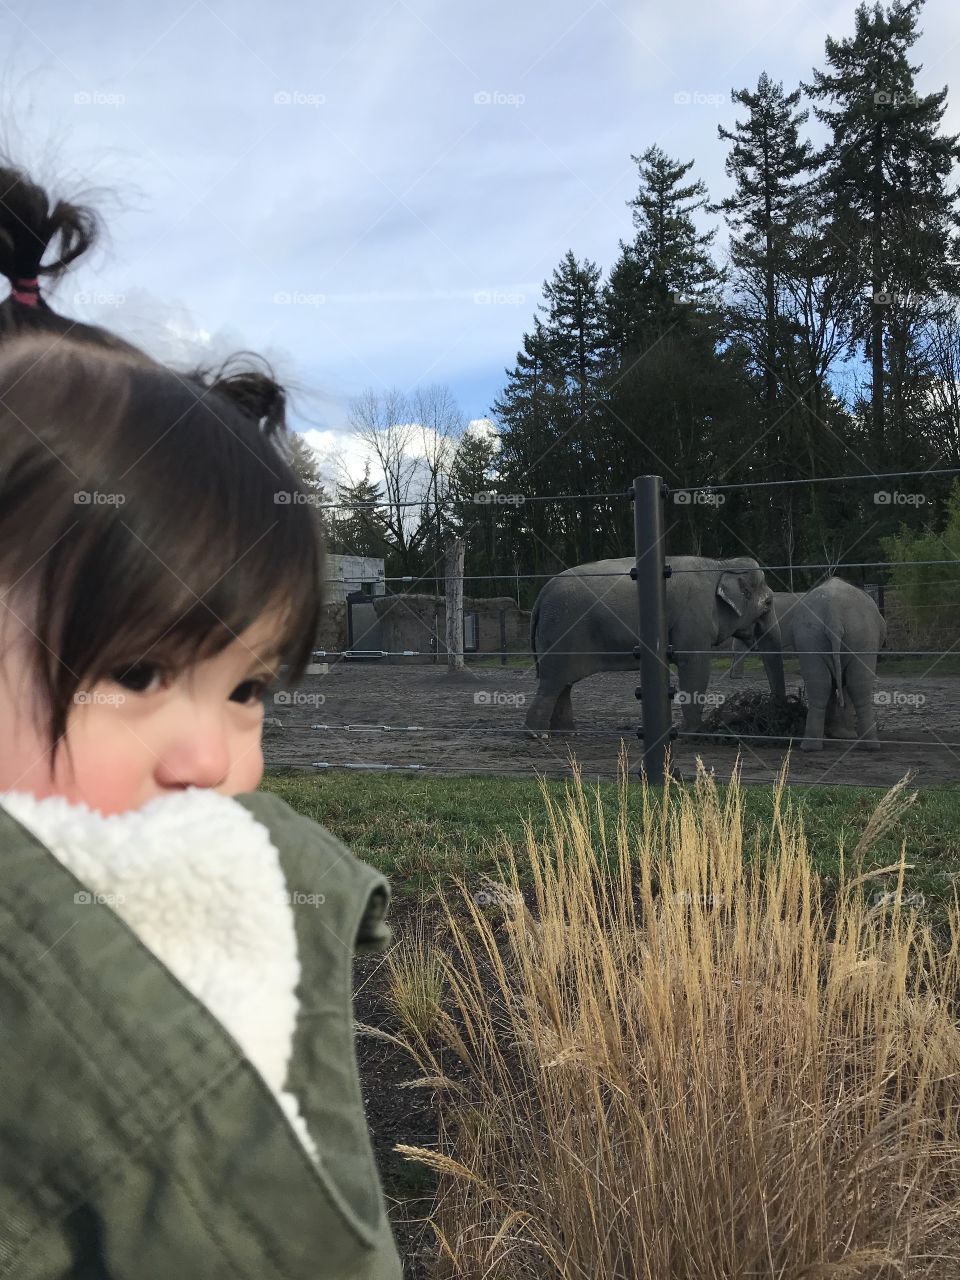 Photo of my daughter at the zoo. First time of her seeing elephants and she was a little confused haha. Love taking this little one and her absorbing everything this world has to offer. 